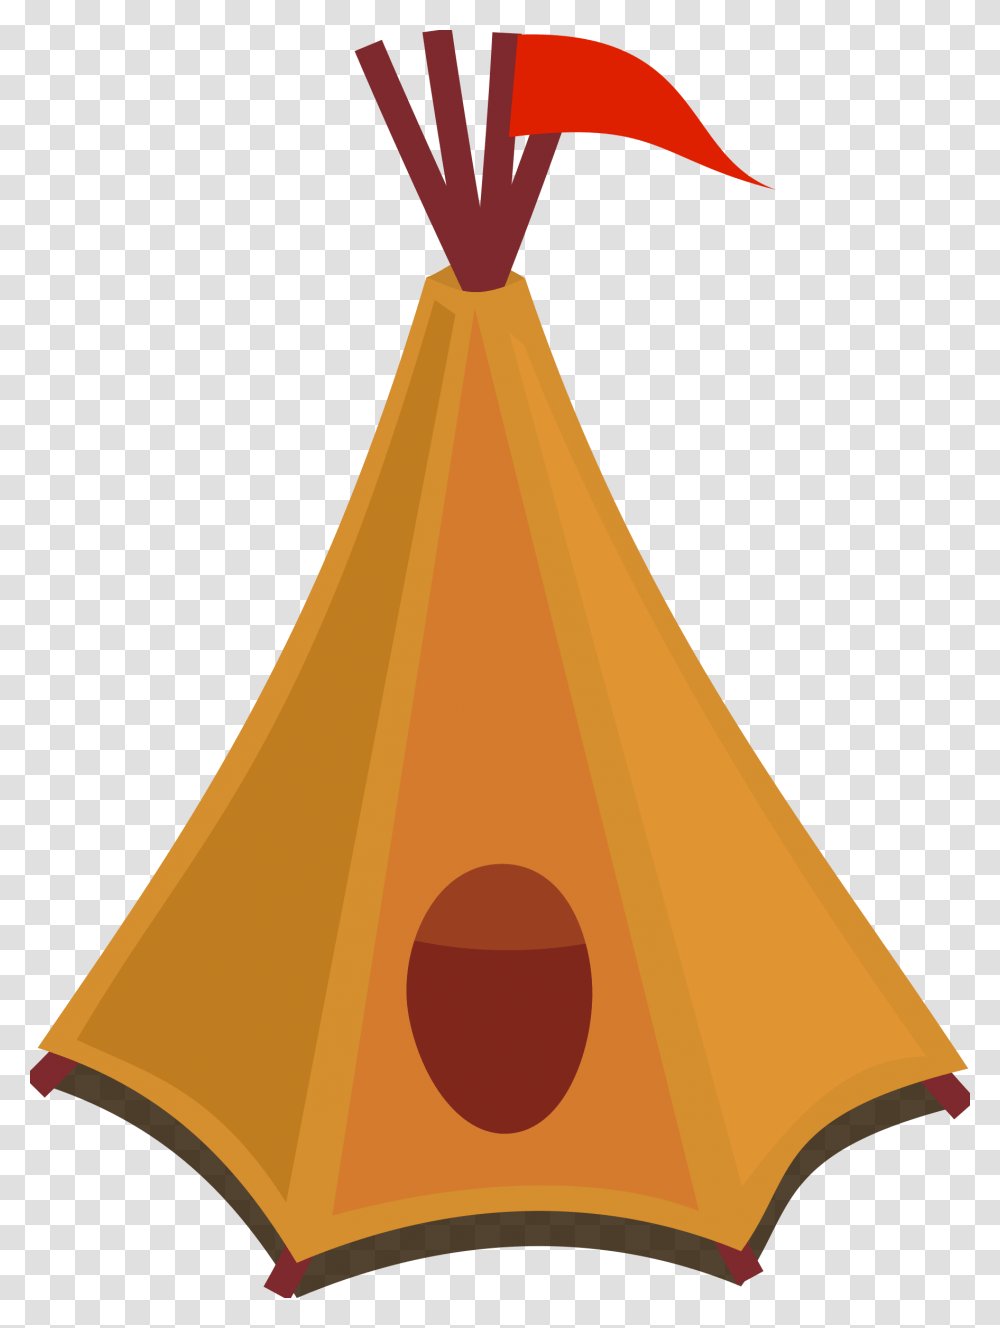 Cartoon Tipi Tent With Red Flag Clip Arts Cartoon Tent, Furniture, Triangle, Cone, Party Hat Transparent Png